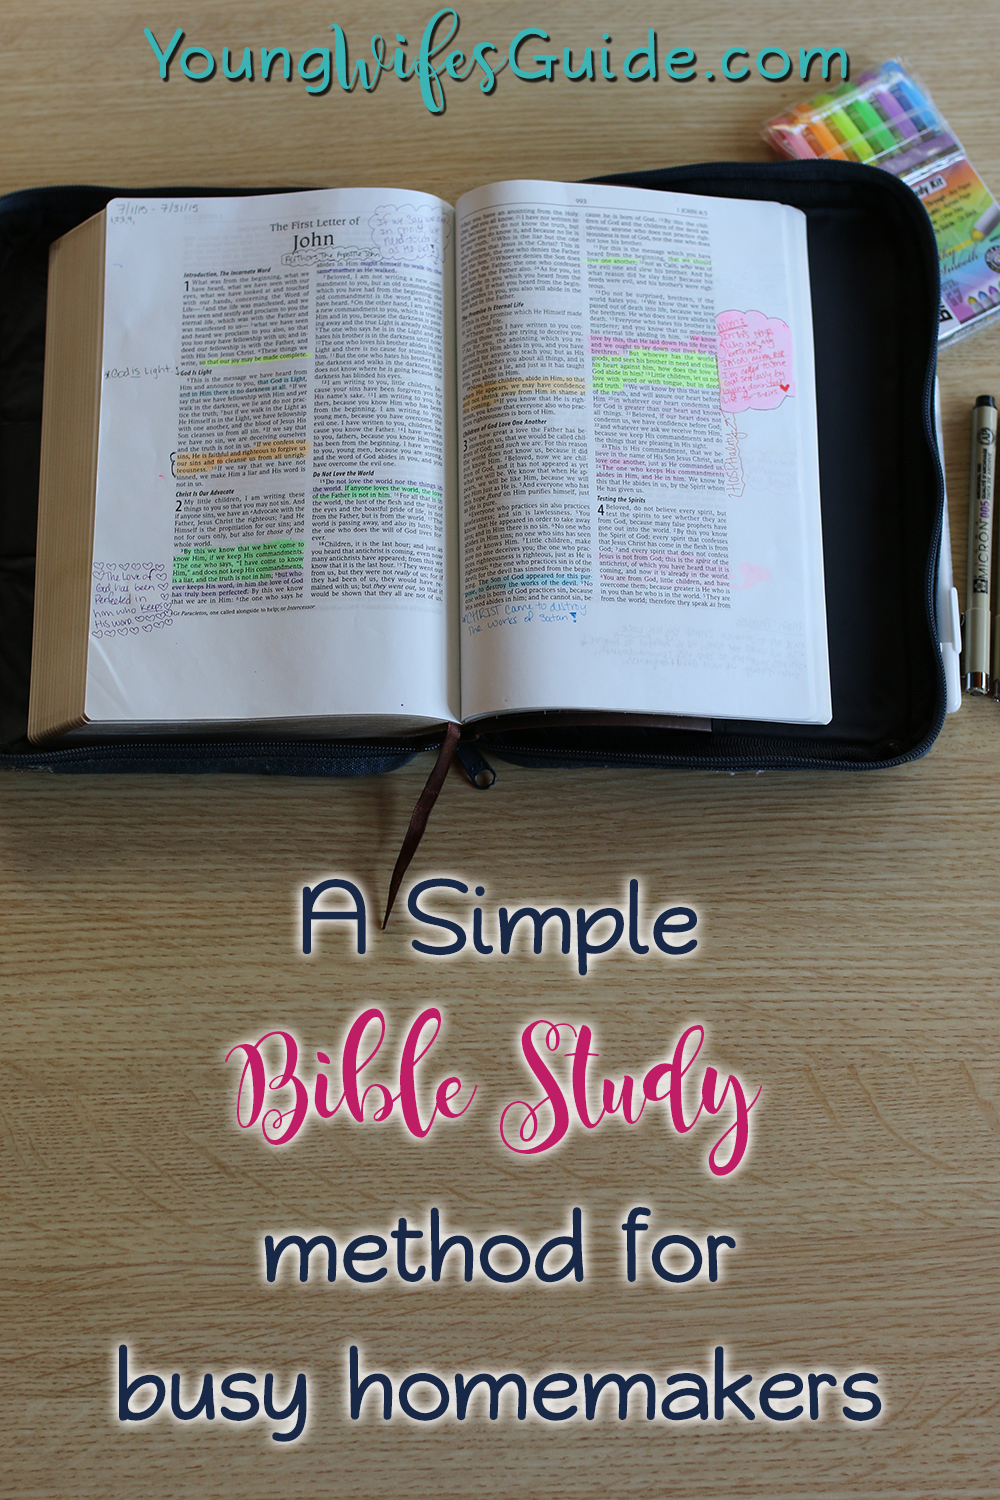 A simple Bible Study method for busy homemakers